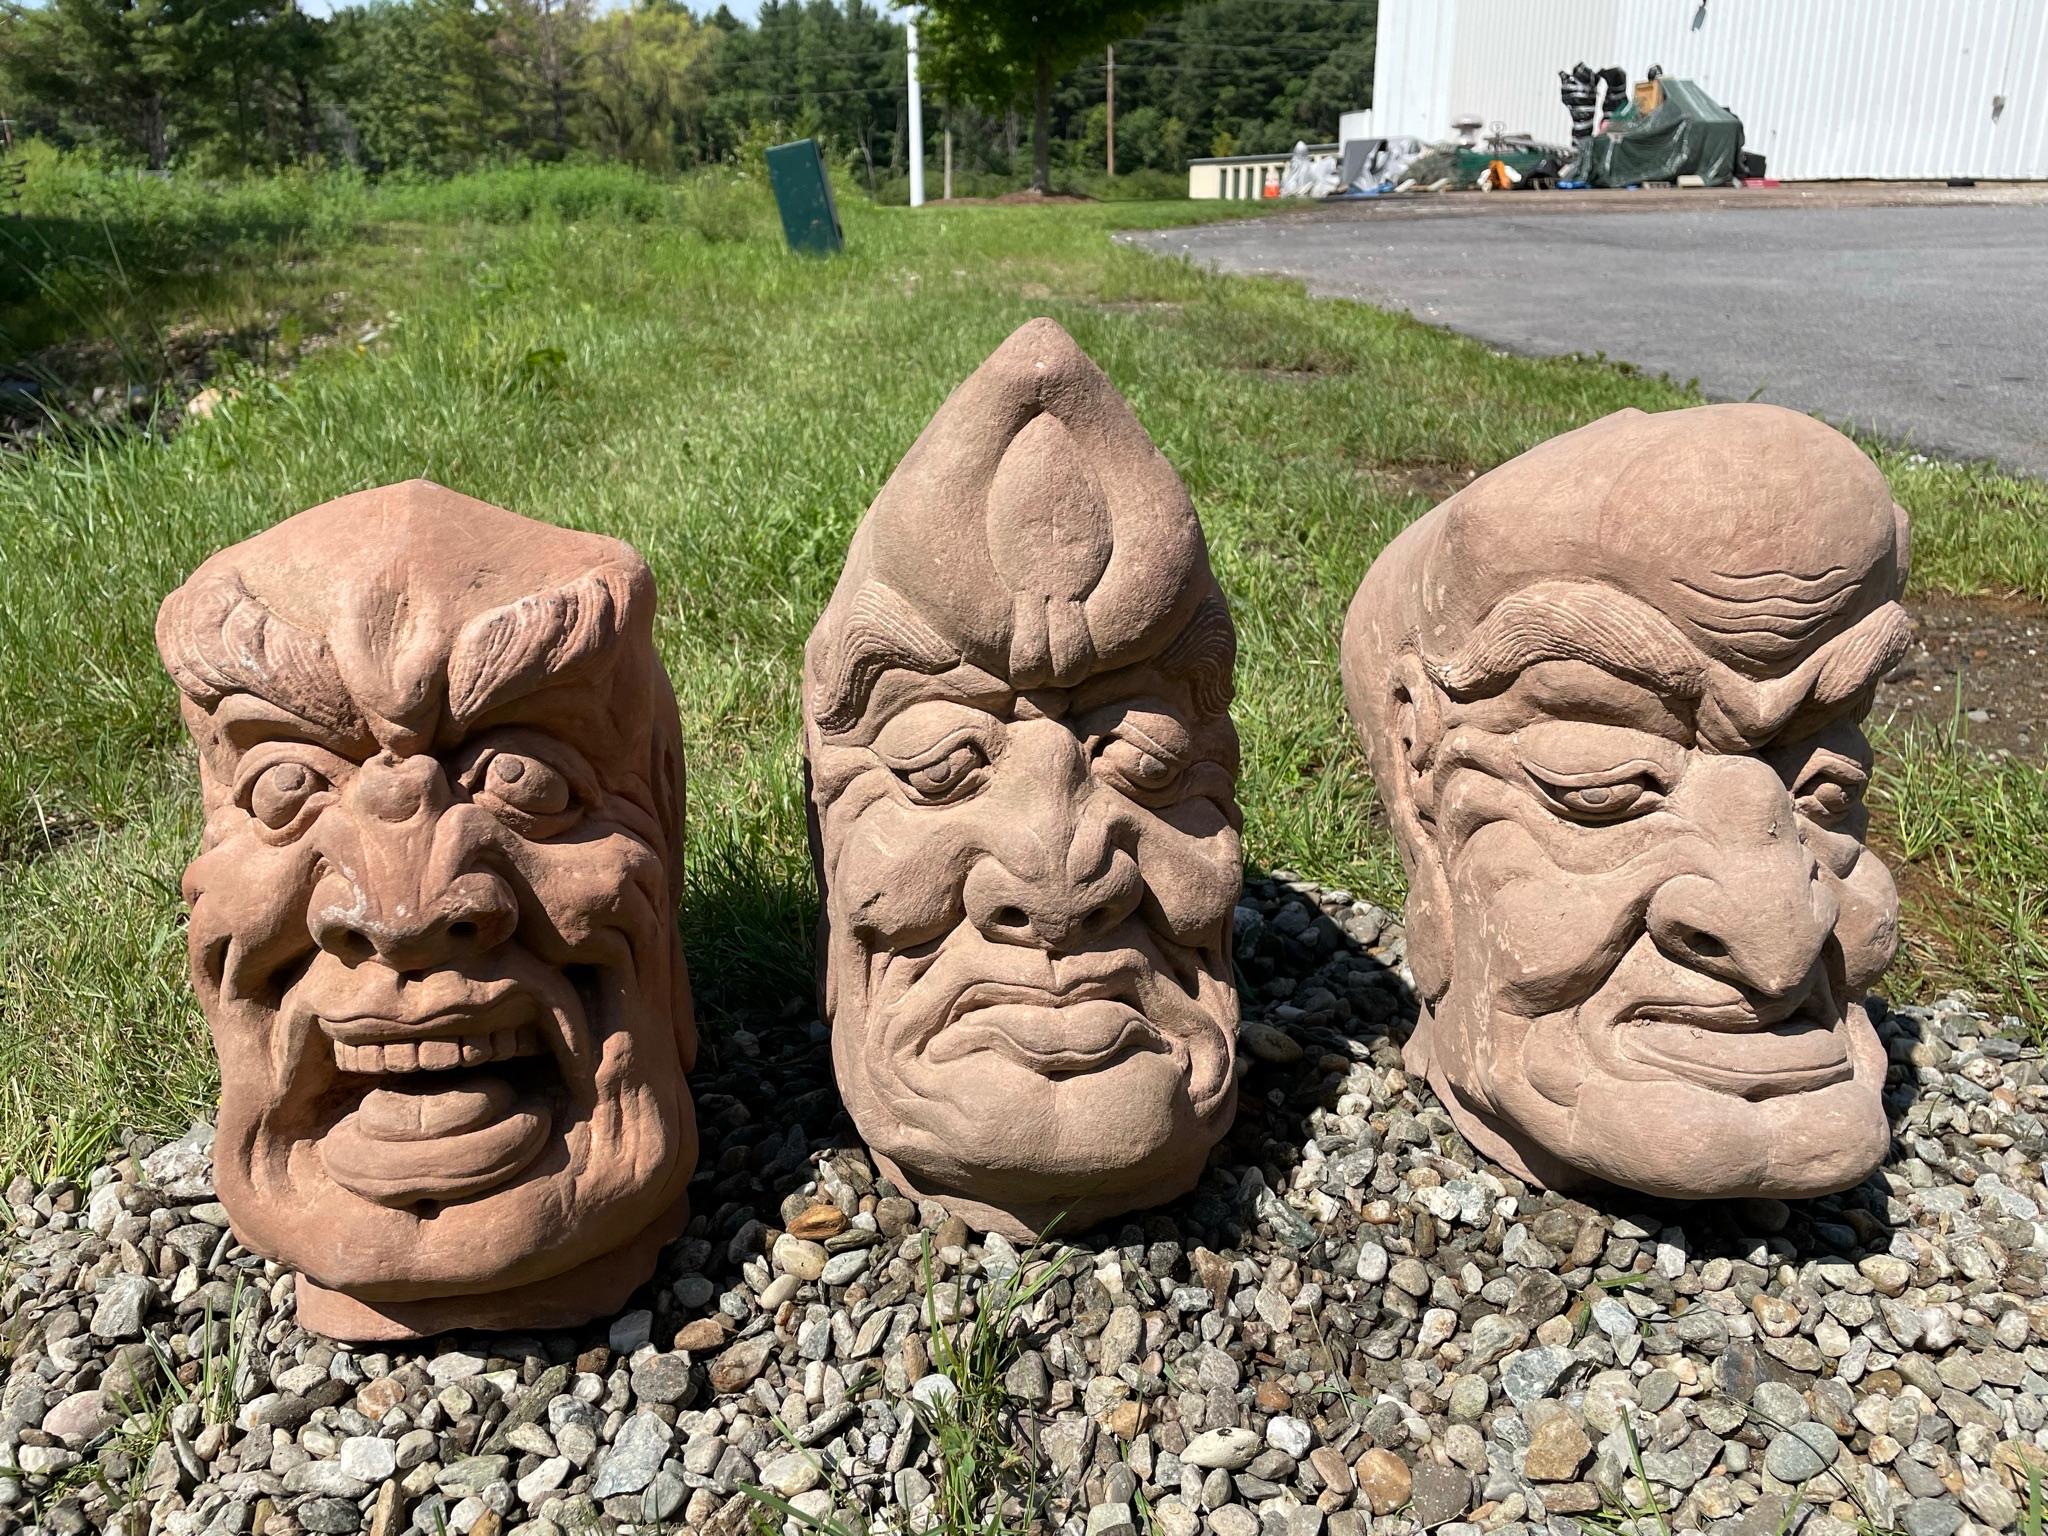 Instant display and collection, one of a kind.

From western China and collected some 20 years ago, comes this group of three (3) large hand carved red sandstone Lohans or Monks dating to the early 20th century. 

These characters feature